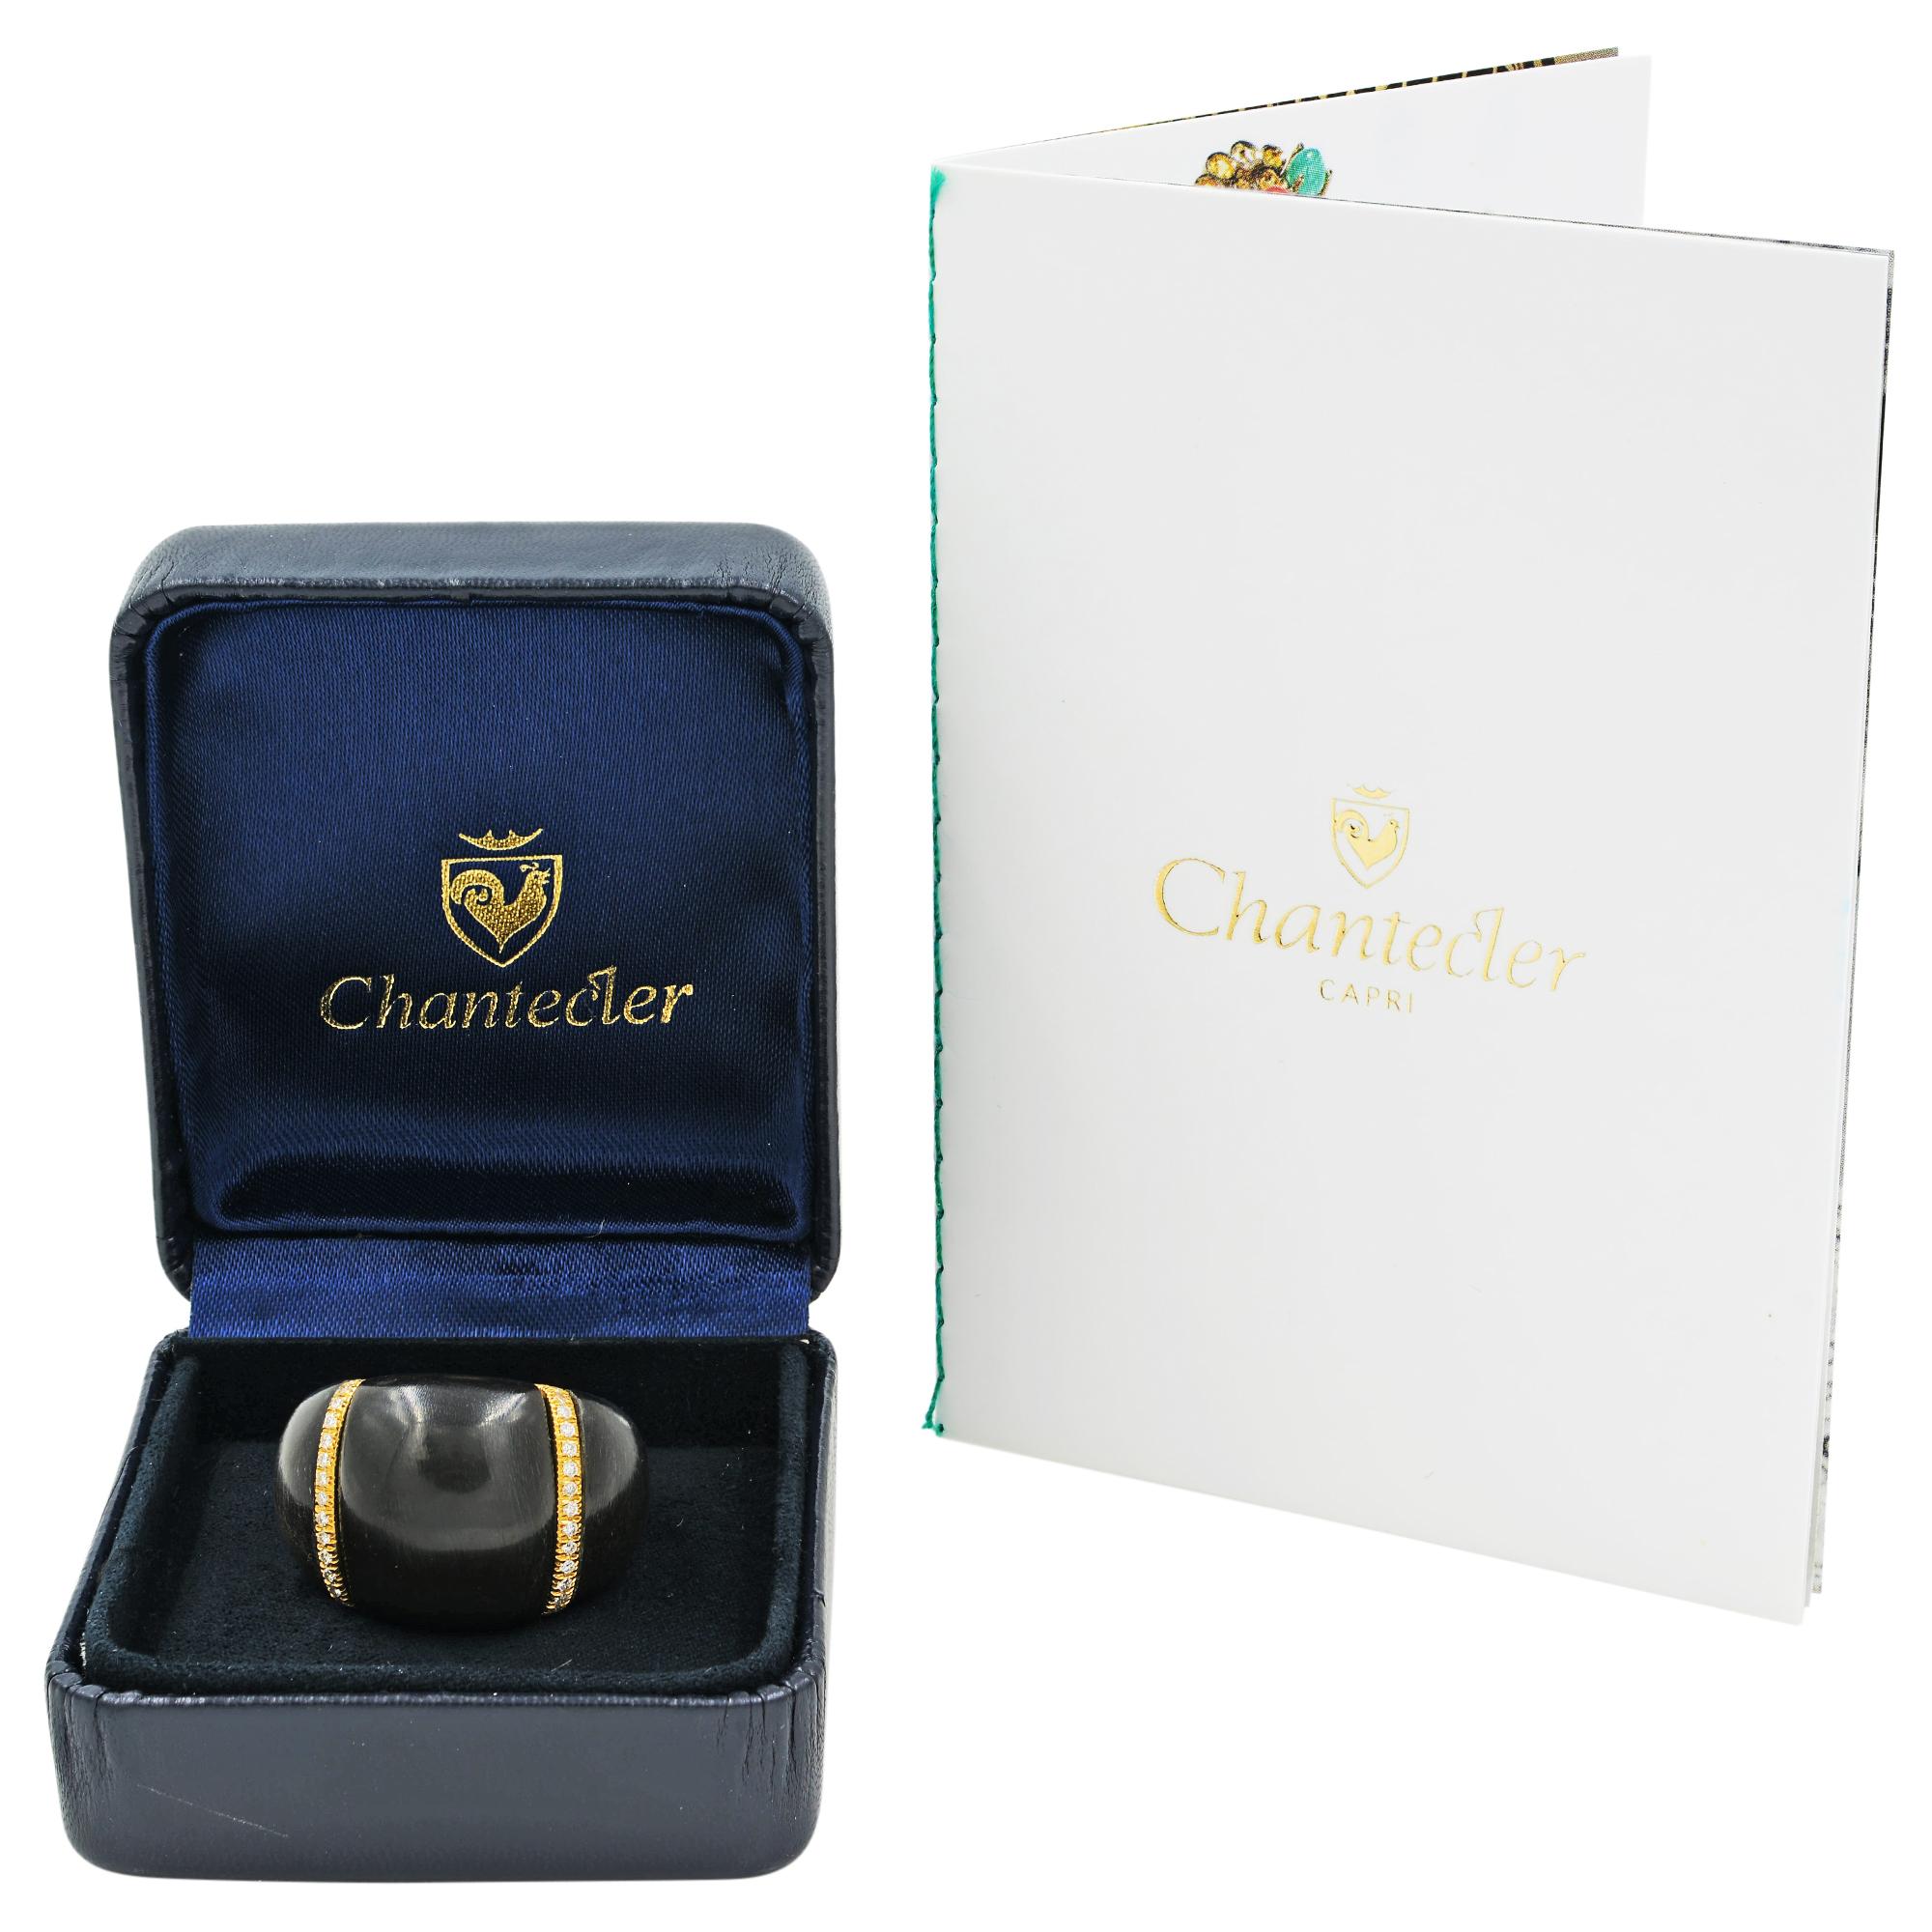 Chantecler Black Onyx Diamond Dome Shaped Ring 18k Yellow Gold 0.50cttw Size 6.5 In New Condition For Sale In New York, NY